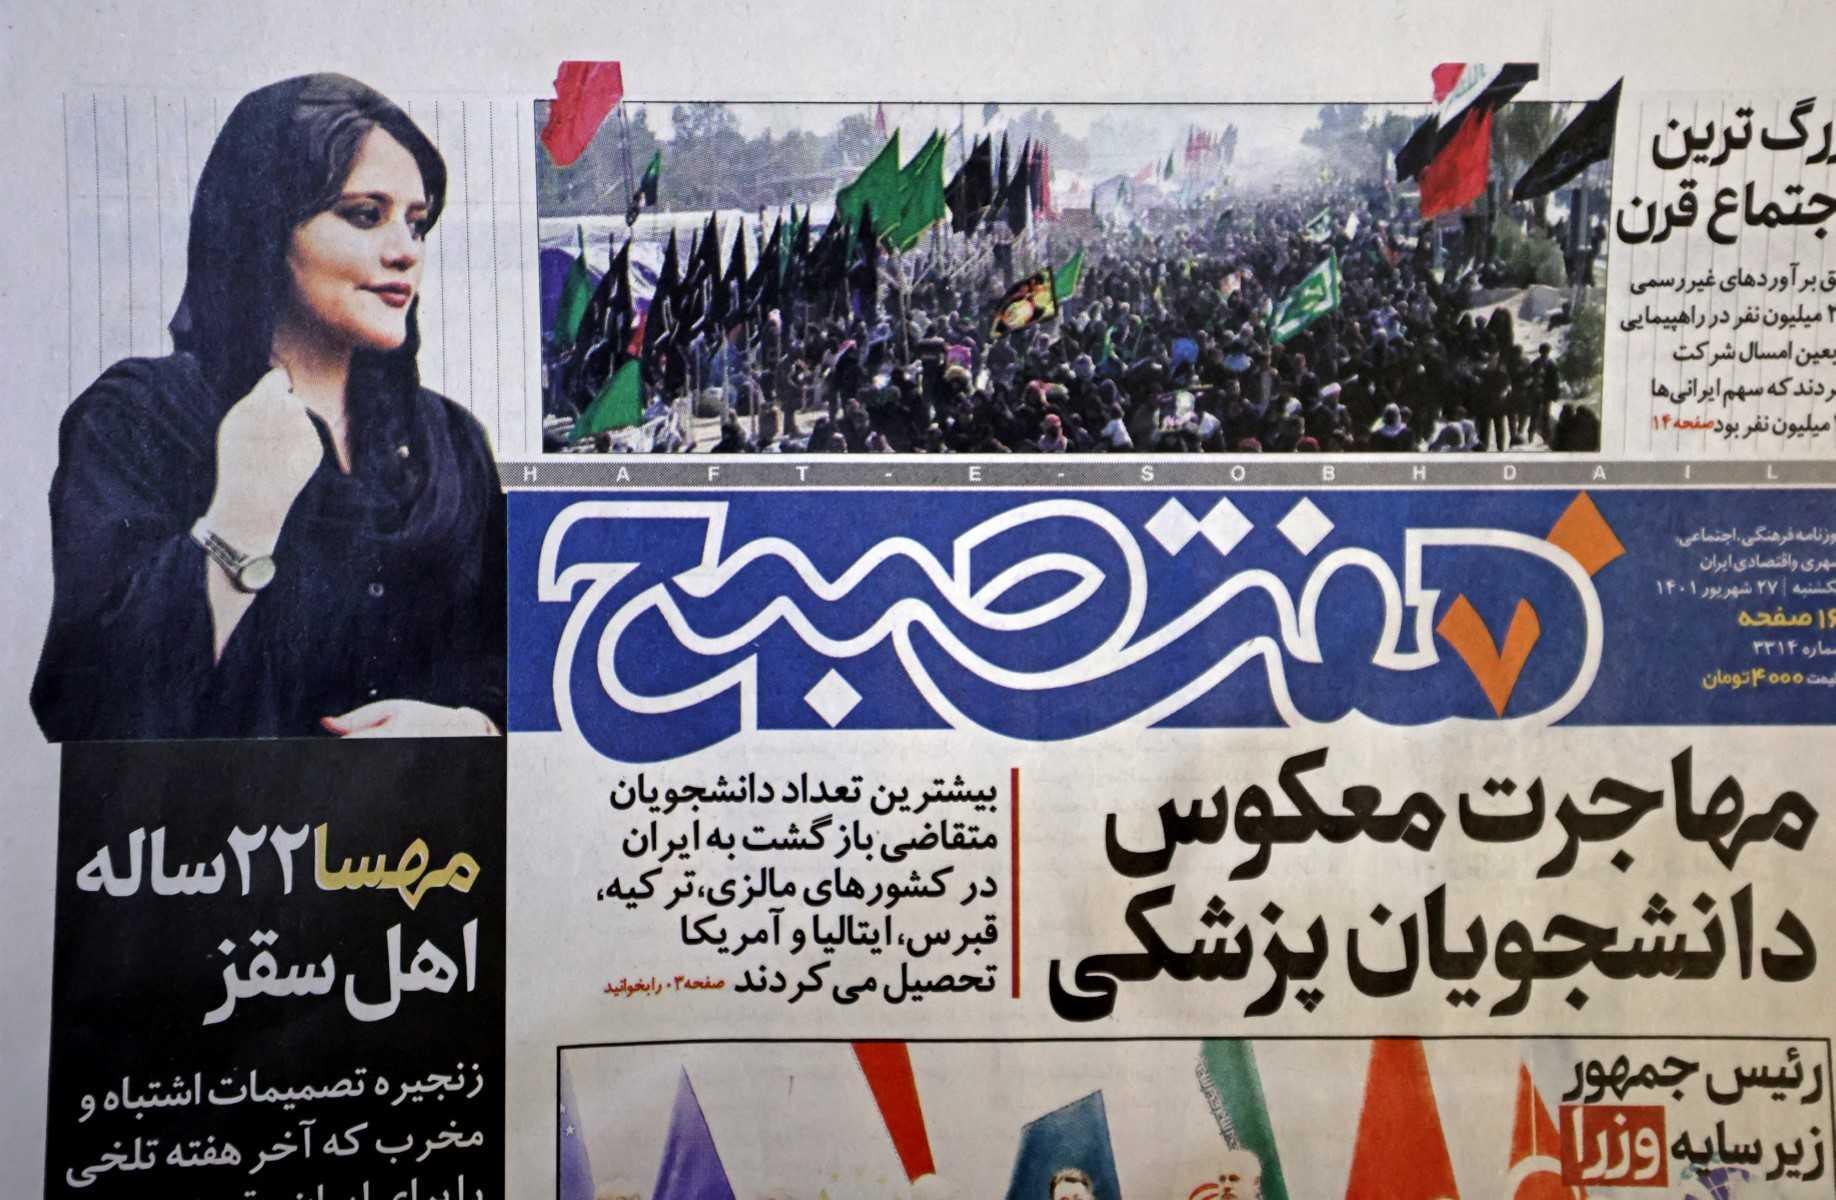 A picture taken in Tehran on Sept 18 shows the front page of the Iranian newspaper Hafteh Sobh featuring a photograph of Mahsa Amini, a woman who died after being arrested by the Islamic republic's 'morality police'. Photo: AFP